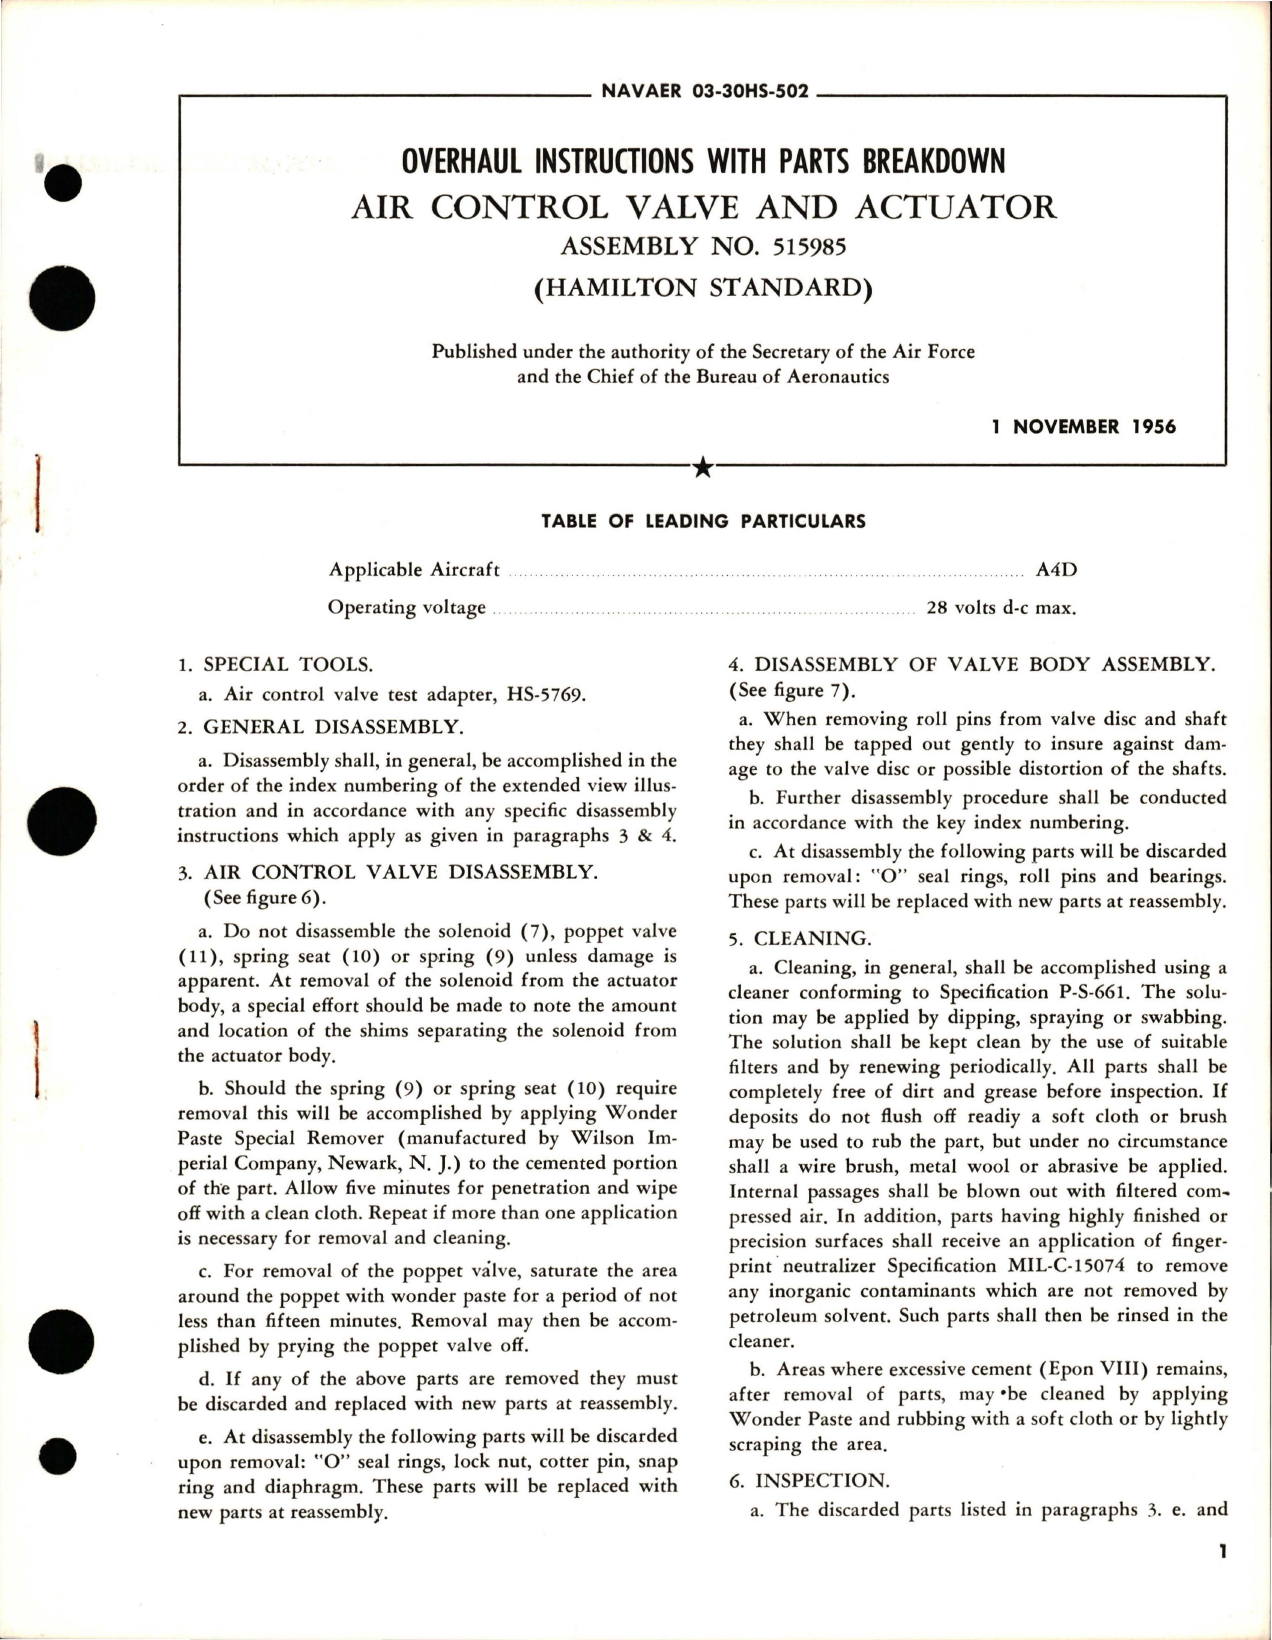 Sample page 1 from AirCorps Library document: Overhaul Instructions with Parts Breakdown for Air Control Valve and Actuator - Assembly 515985